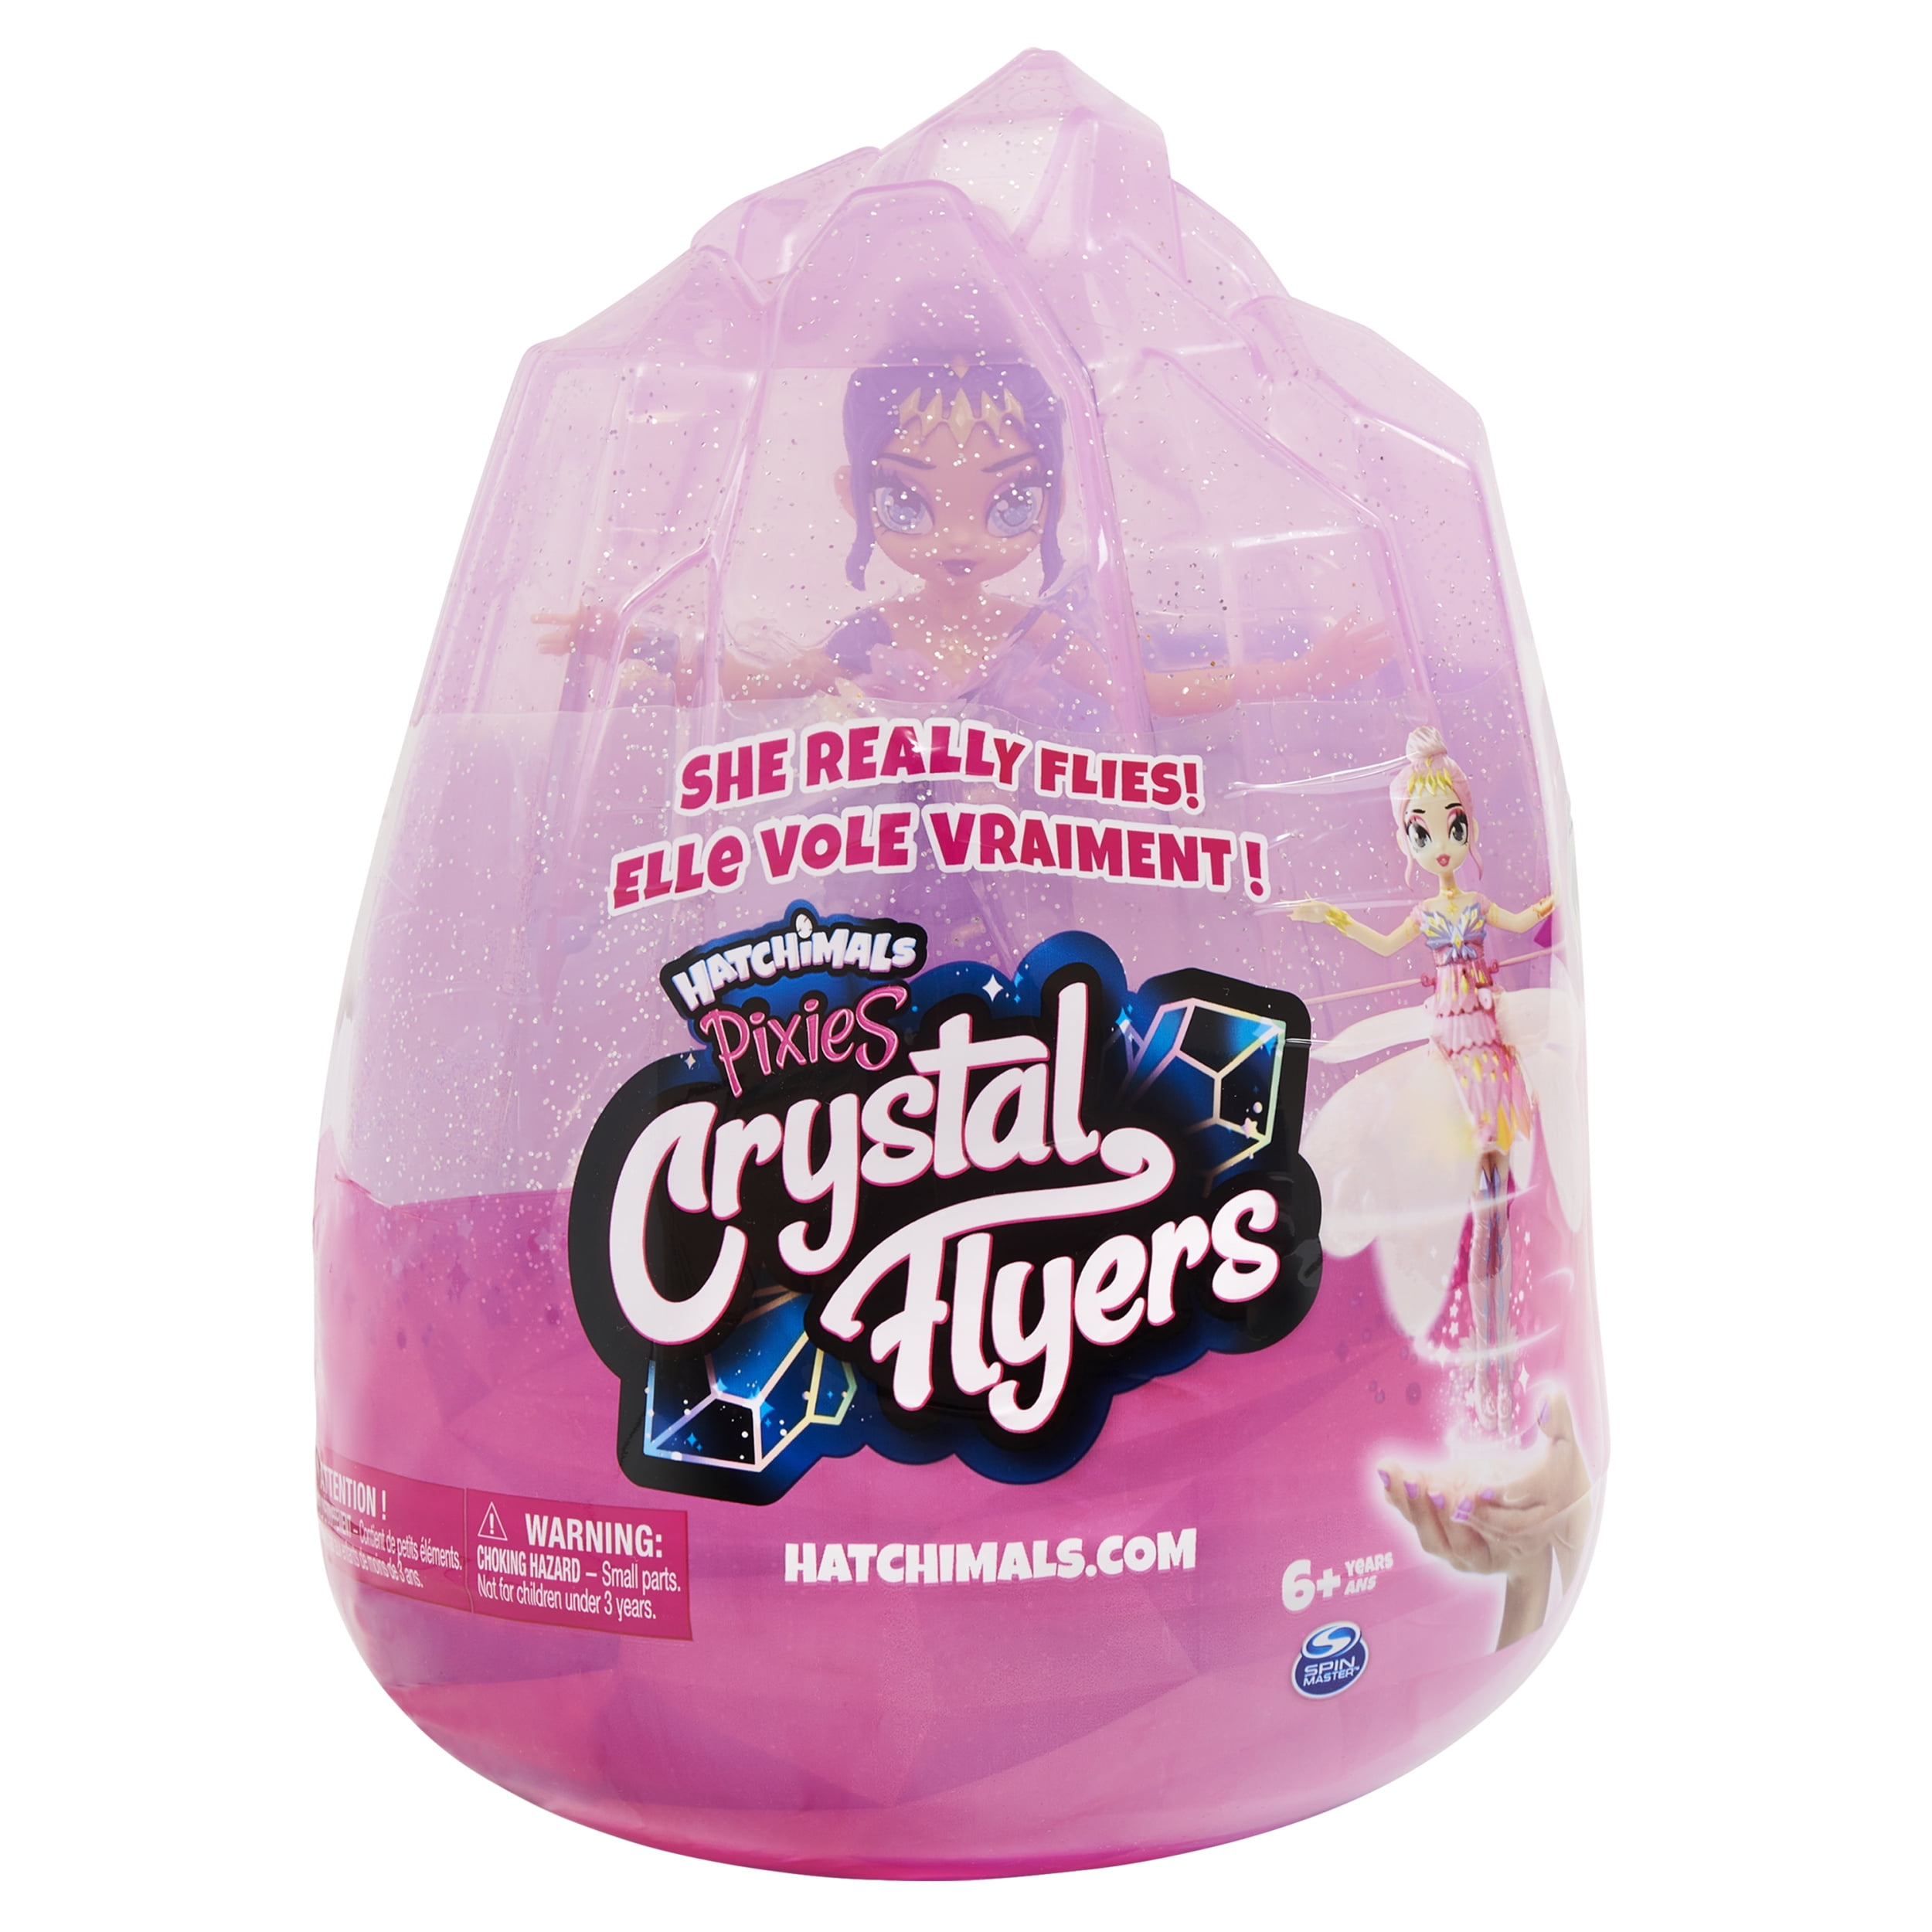 for sale online 6059446 Crystal Flyers Pink Magical Flying Pixie Toy Spin Master Hatchimals Pixies